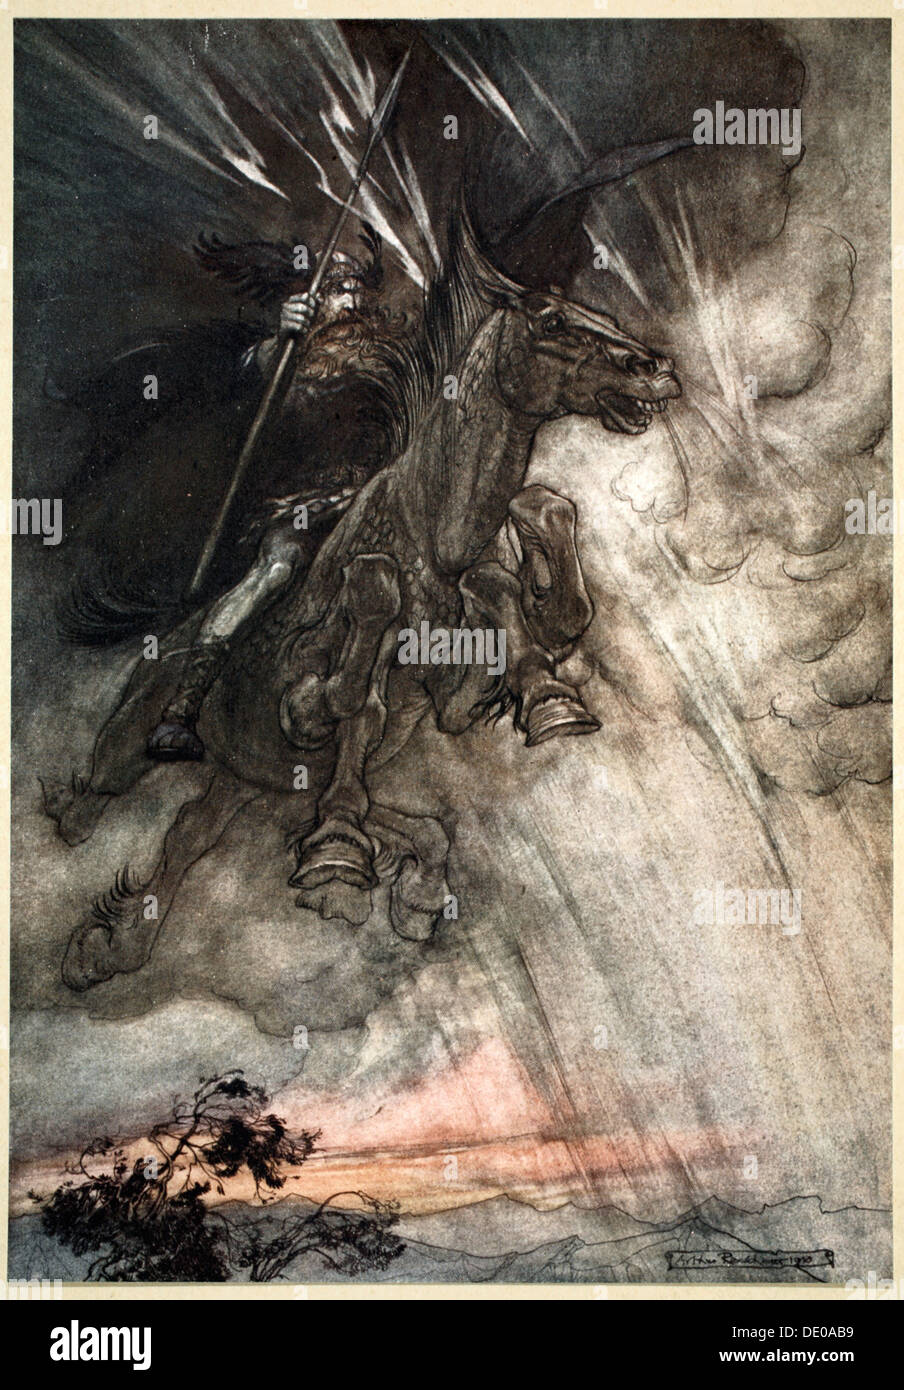 'Raging, Wotan Rides to the Rock! Like a Storm-wind he comes!', 1910.  Artist: Arthur Rackham Stock Photo